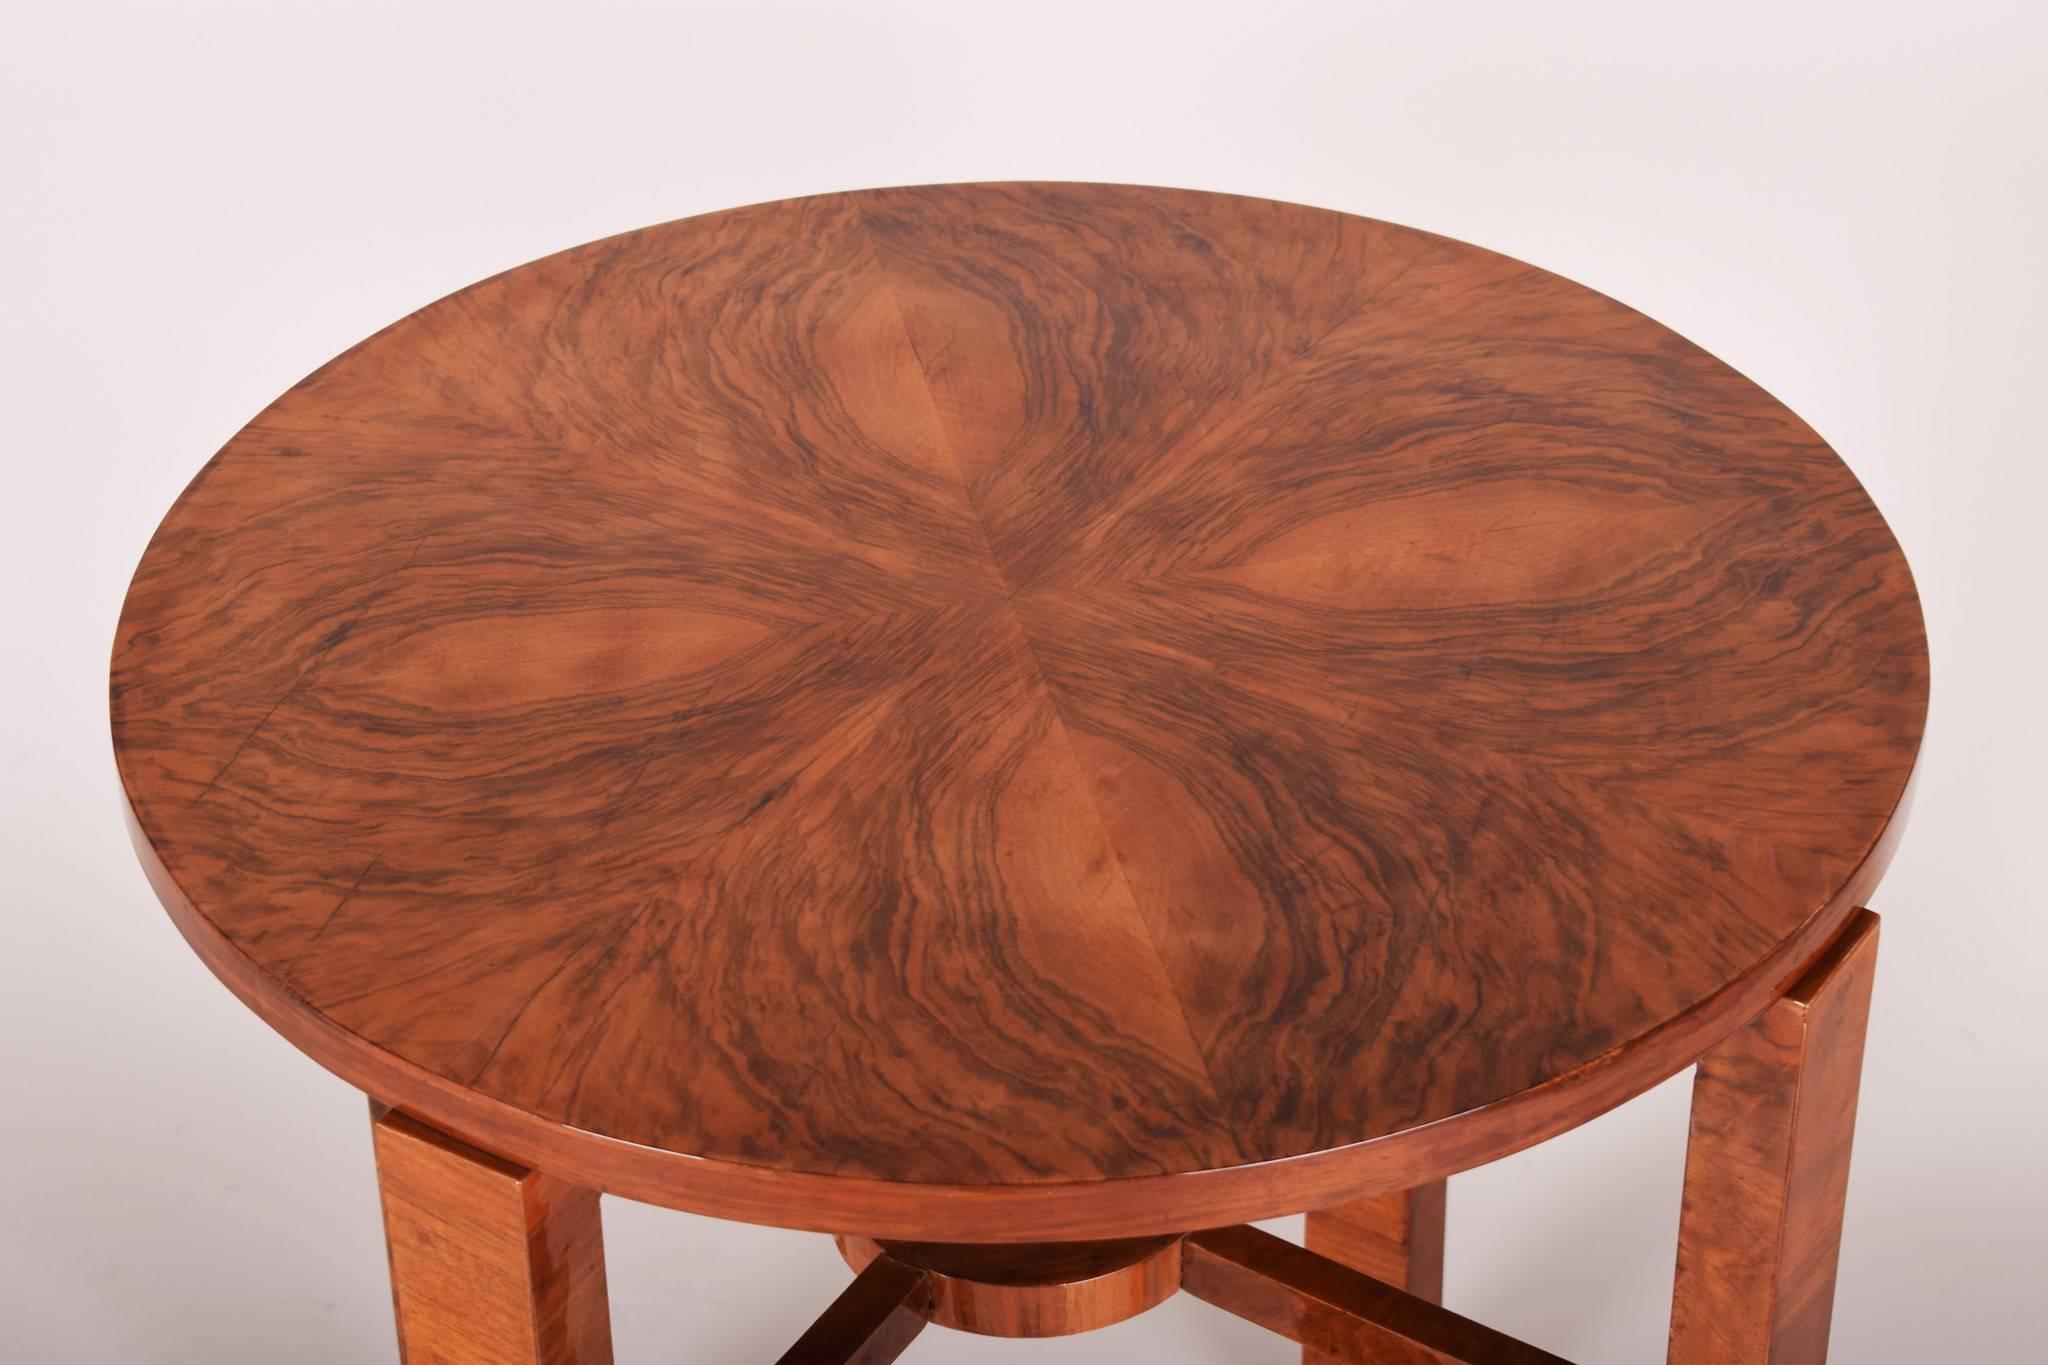 Art Deco table, German
Completely restored. 
Material: Walnut.

We guarantee safe a the cheapest air transport from Europe to the whole world within 7 days.
The price is the same as for ship transport but delivery time is really shorter.
We create a